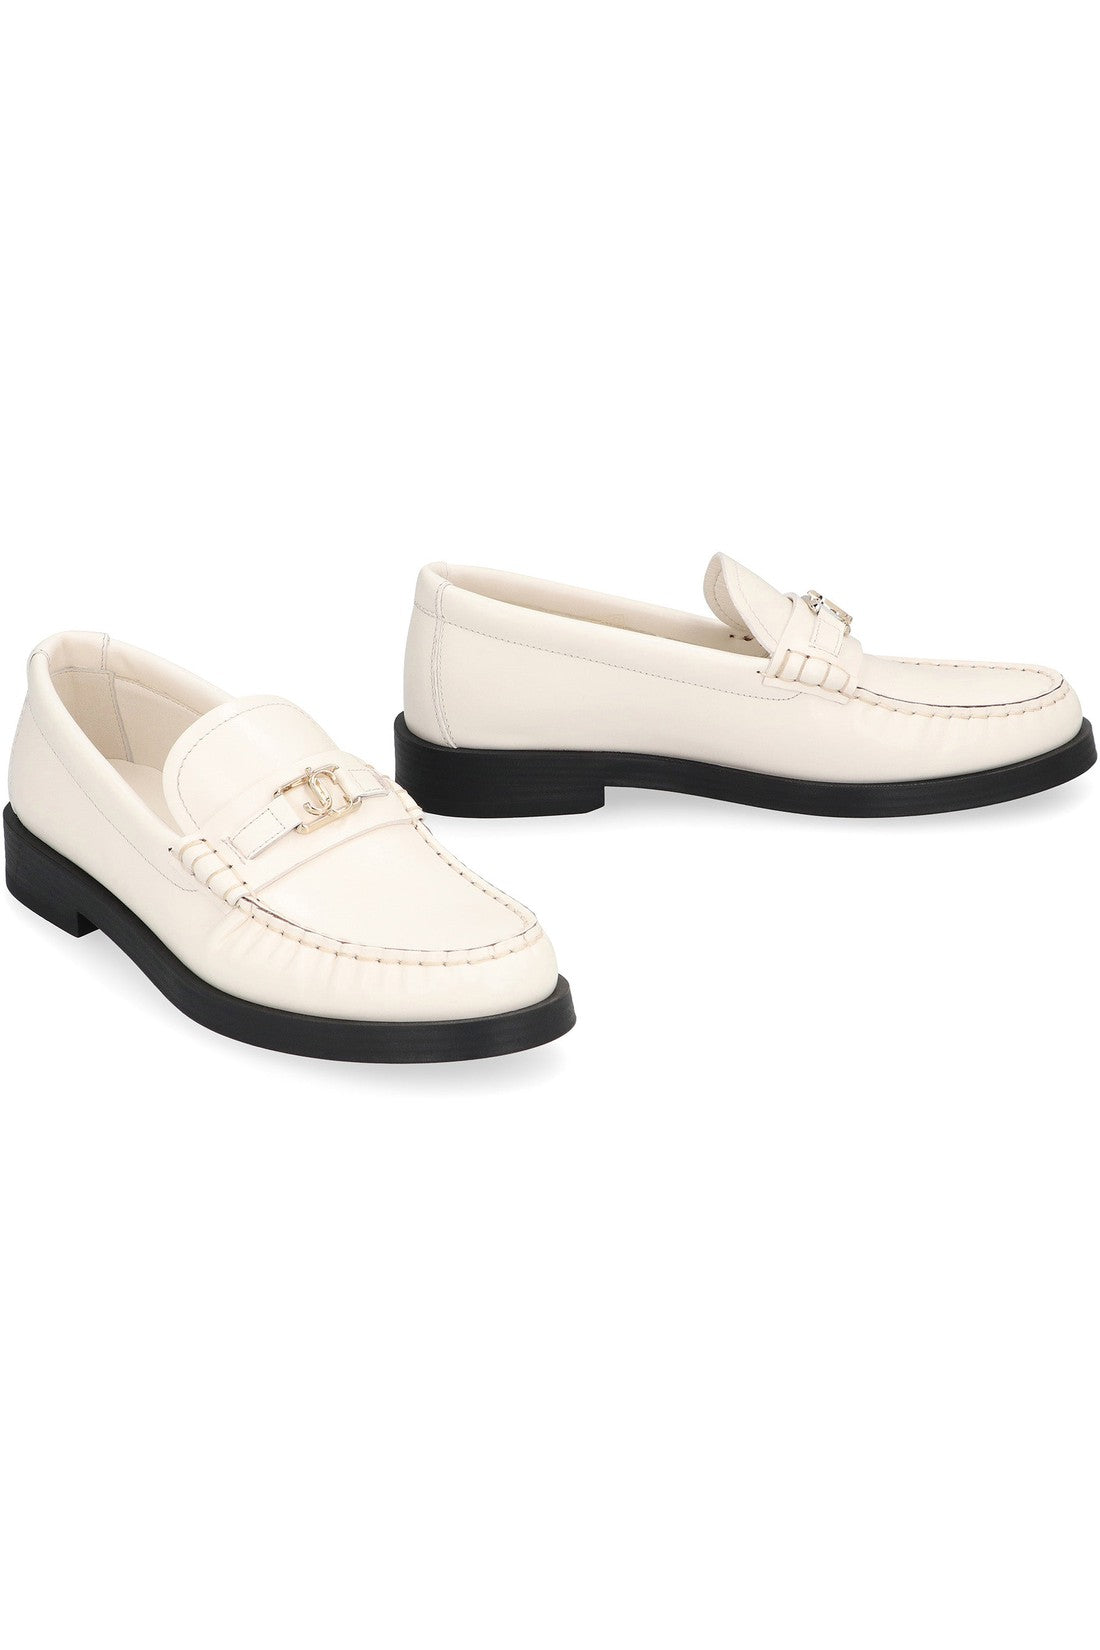 Jimmy Choo-OUTLET-SALE-Addie Leather loafers-ARCHIVIST